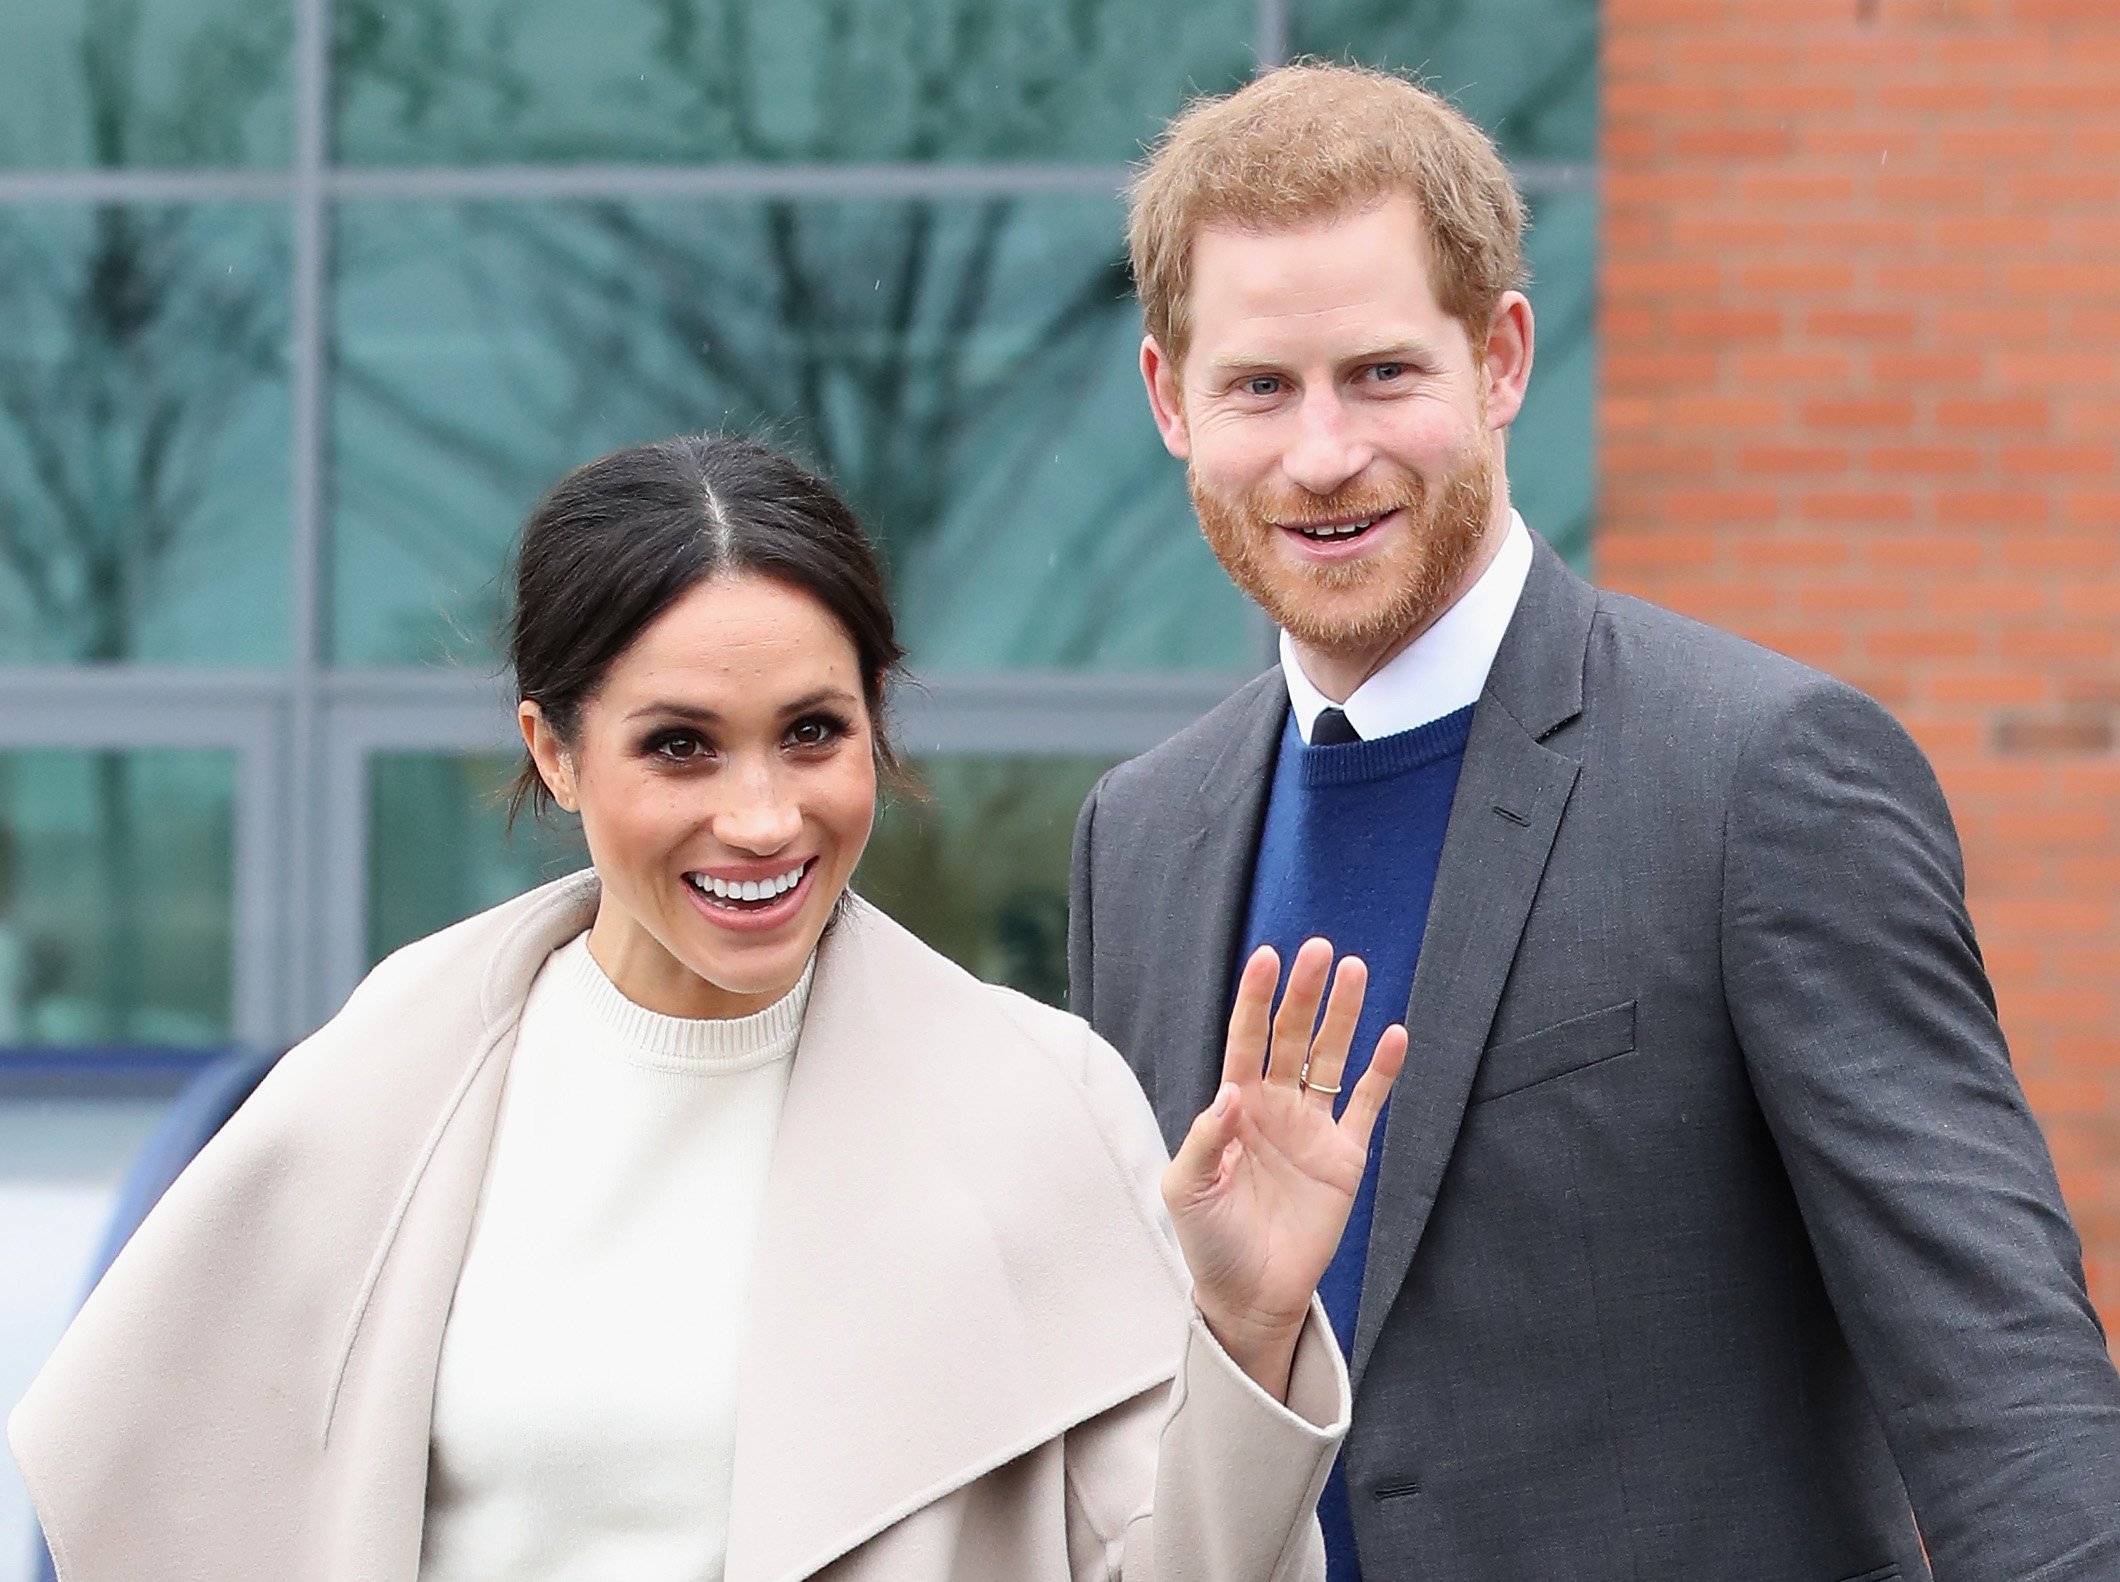 Meghan Markle and Prince Harry leave a sciene park in Belfast, Northern Ireland on March 23, 2018 | Photo: Getty Images